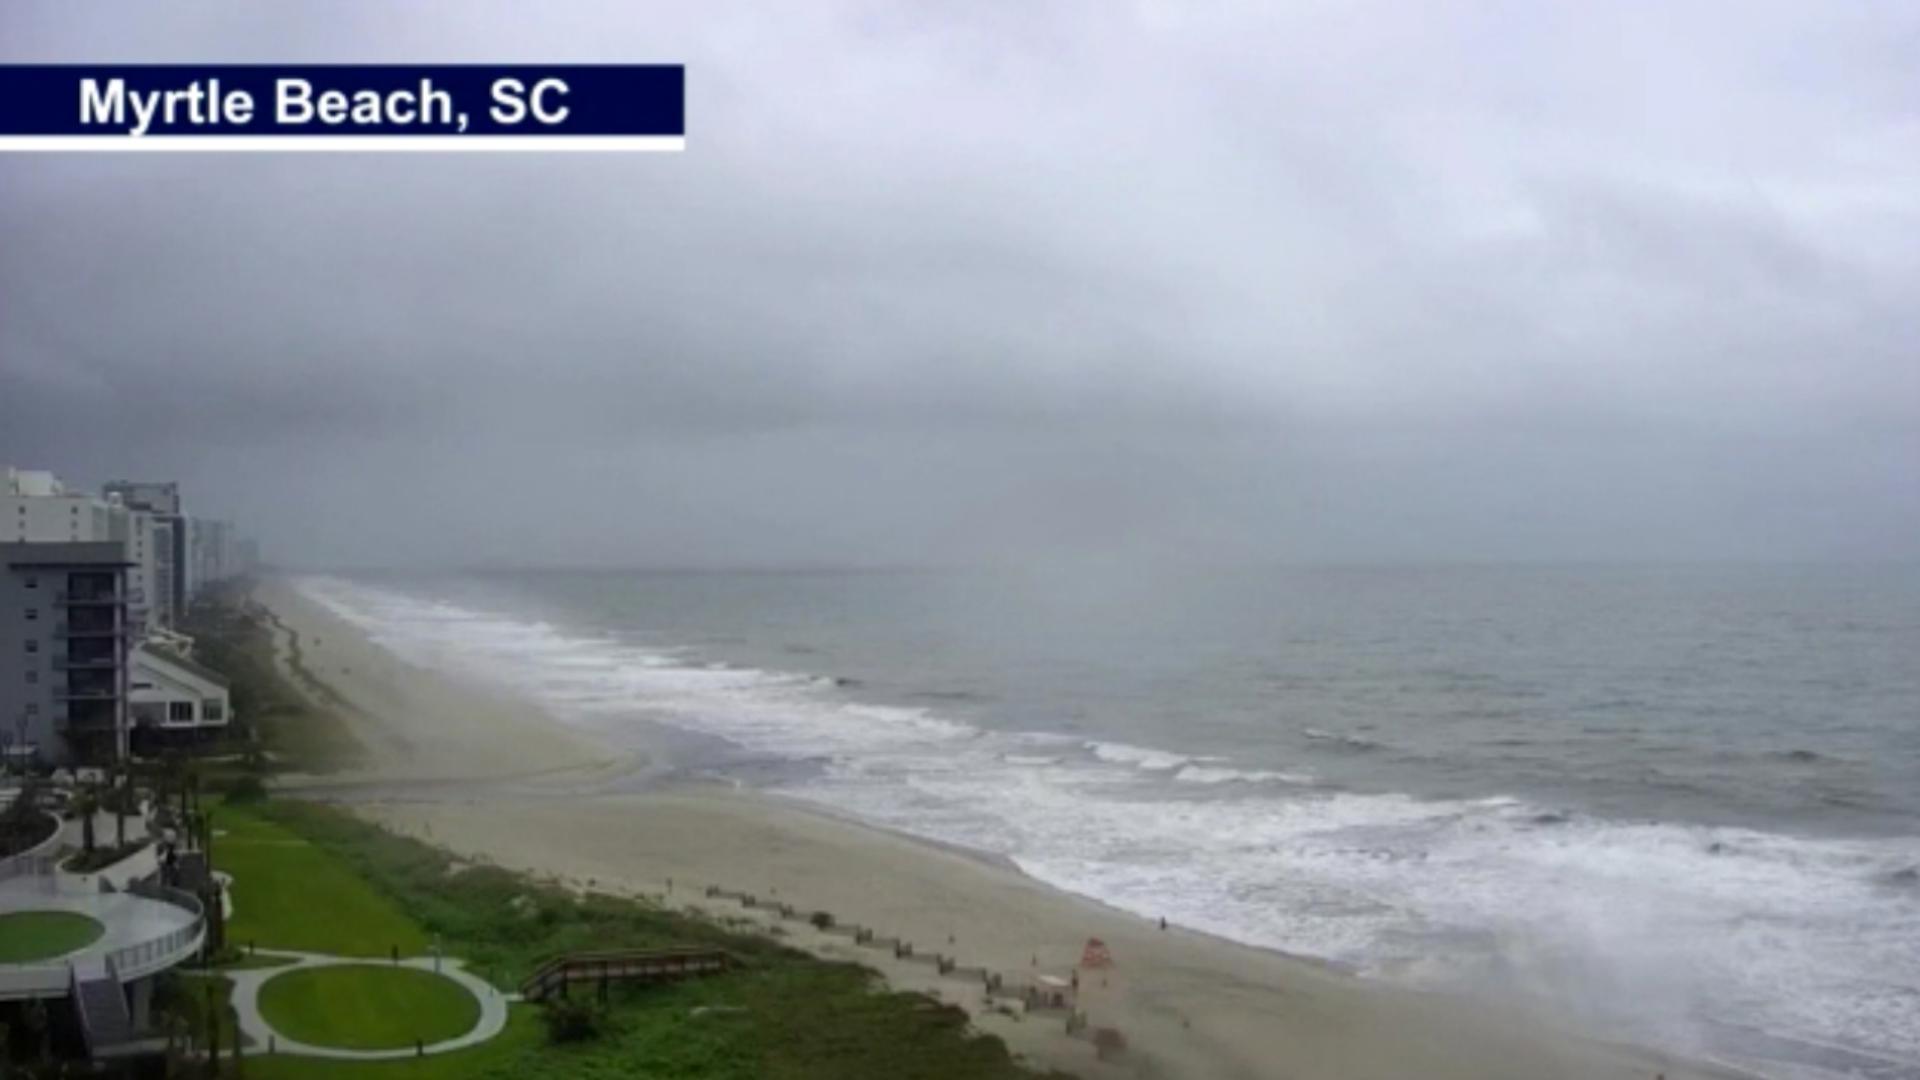 As Tropical Storm Debby makes its way to the Carolinas, take a look at how it is impacting Myrtle Beach.